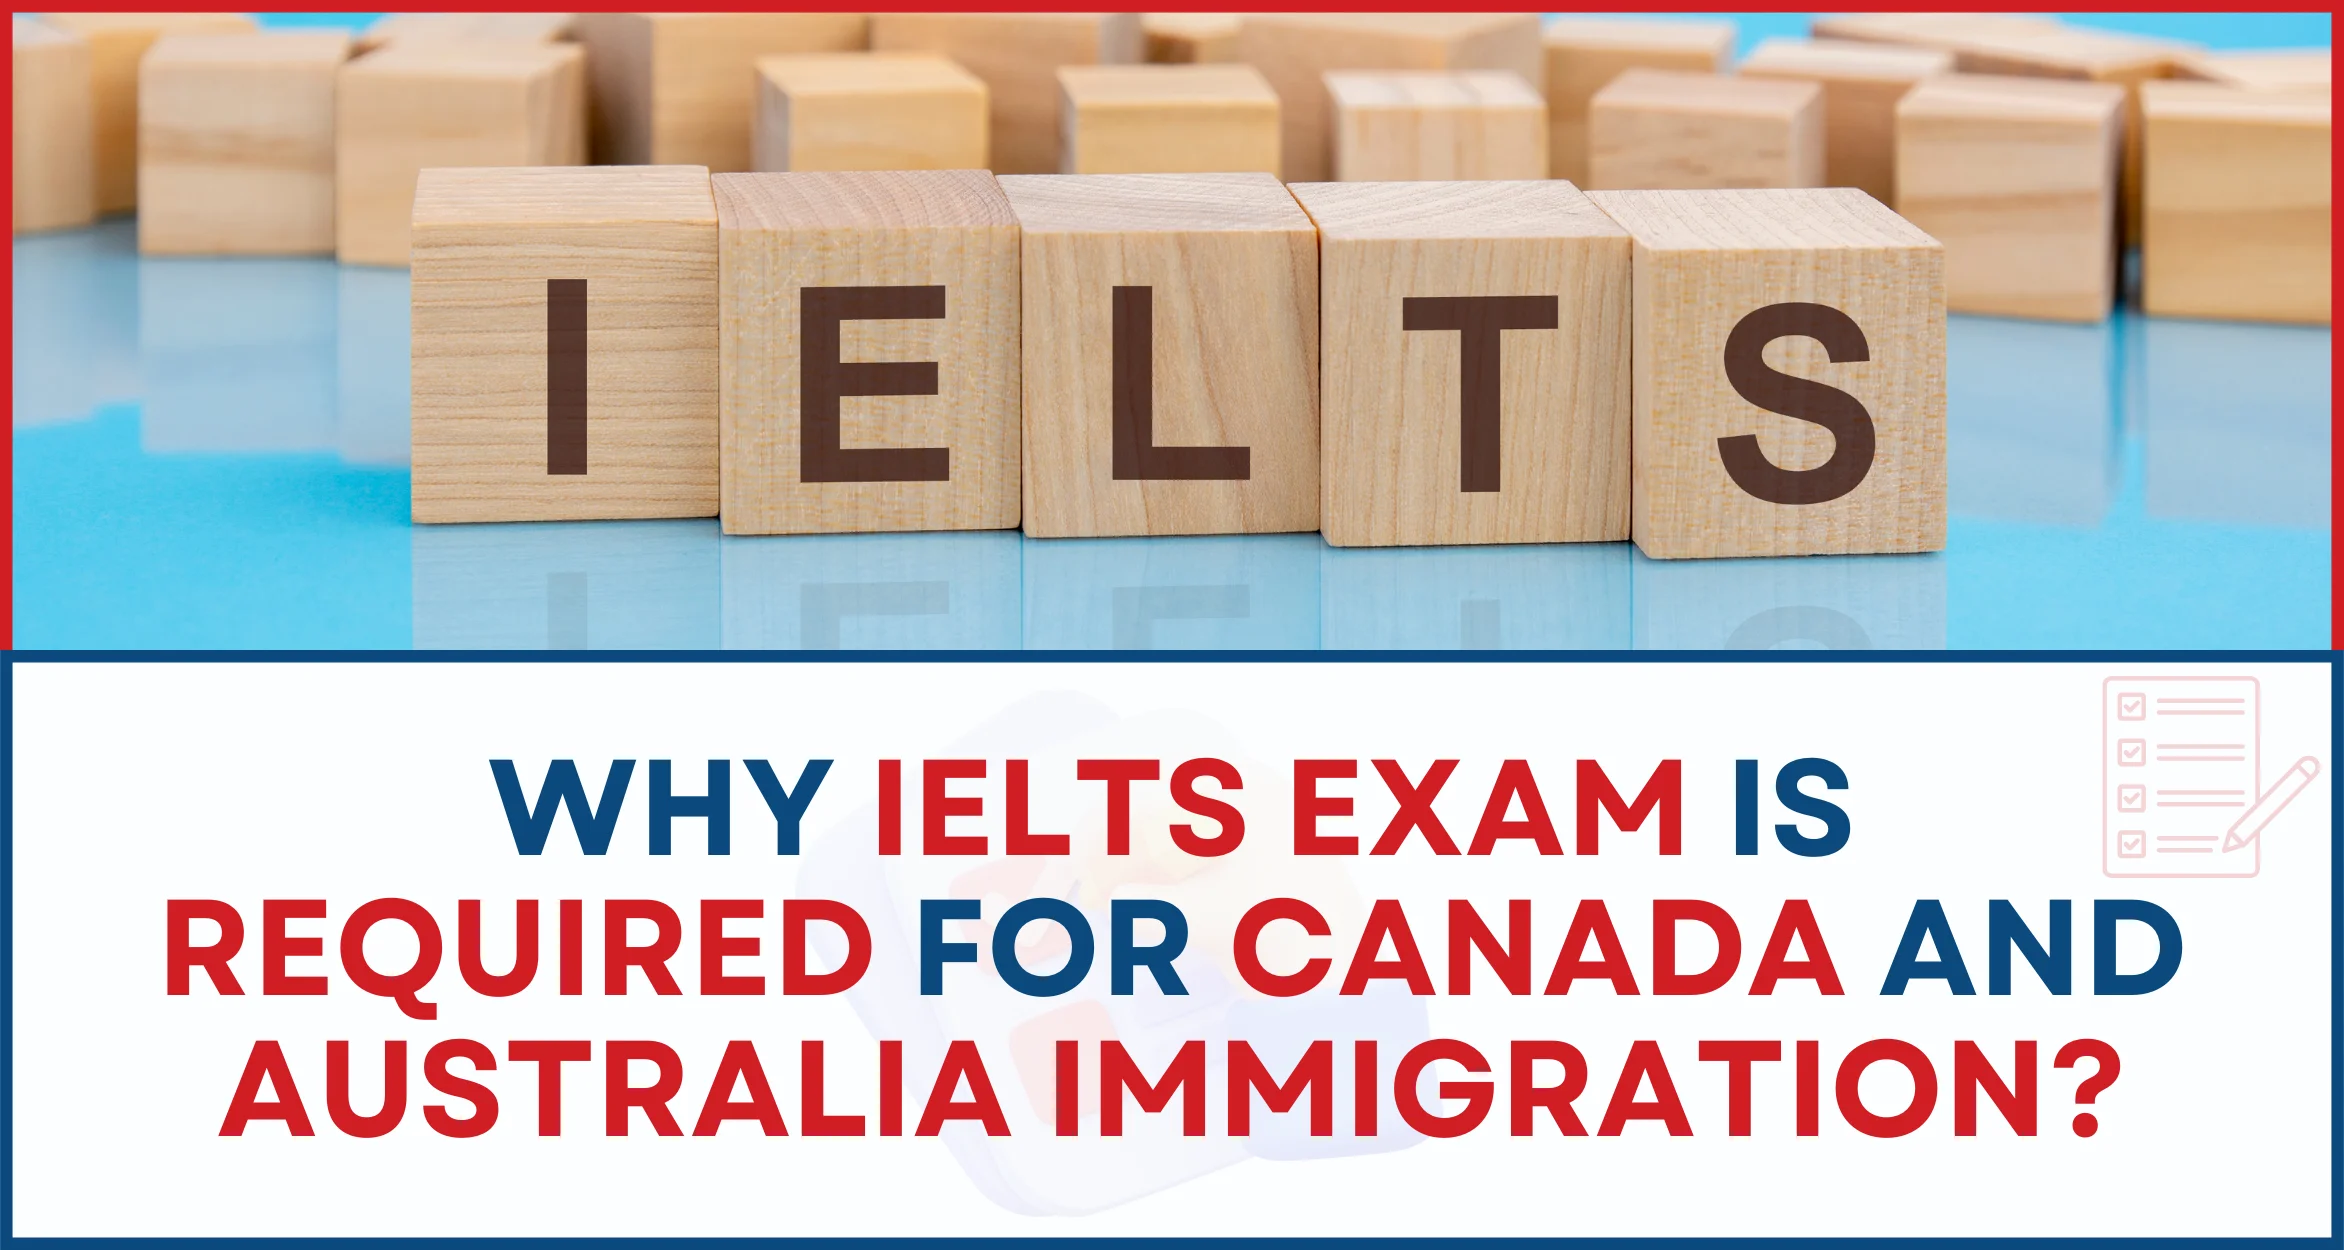 Why ielts exam is required for Canada and Australia immigration?